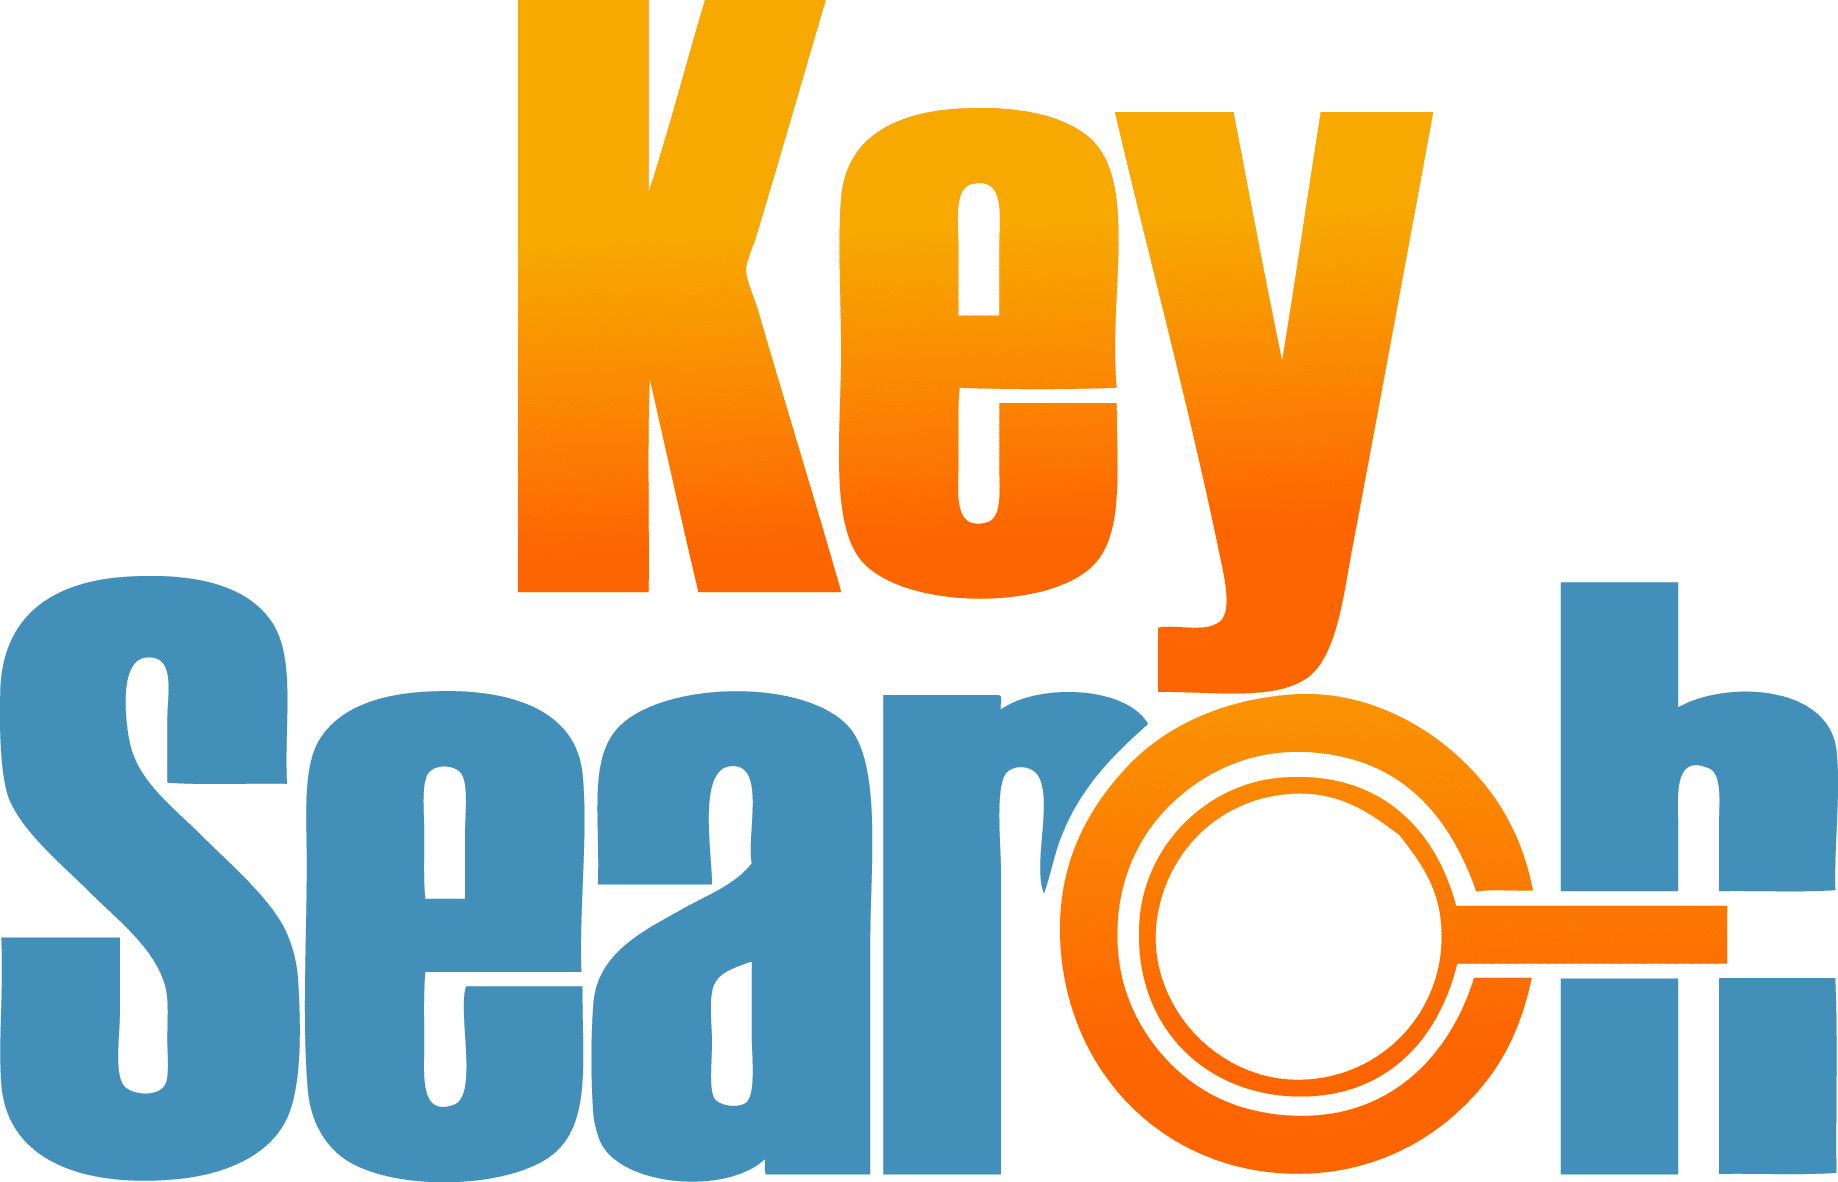 Keysearch - An easy-to-use web-based keyword research tool with in-depth competition analysis, keyword difficulty checker, keyword suggestions and more.